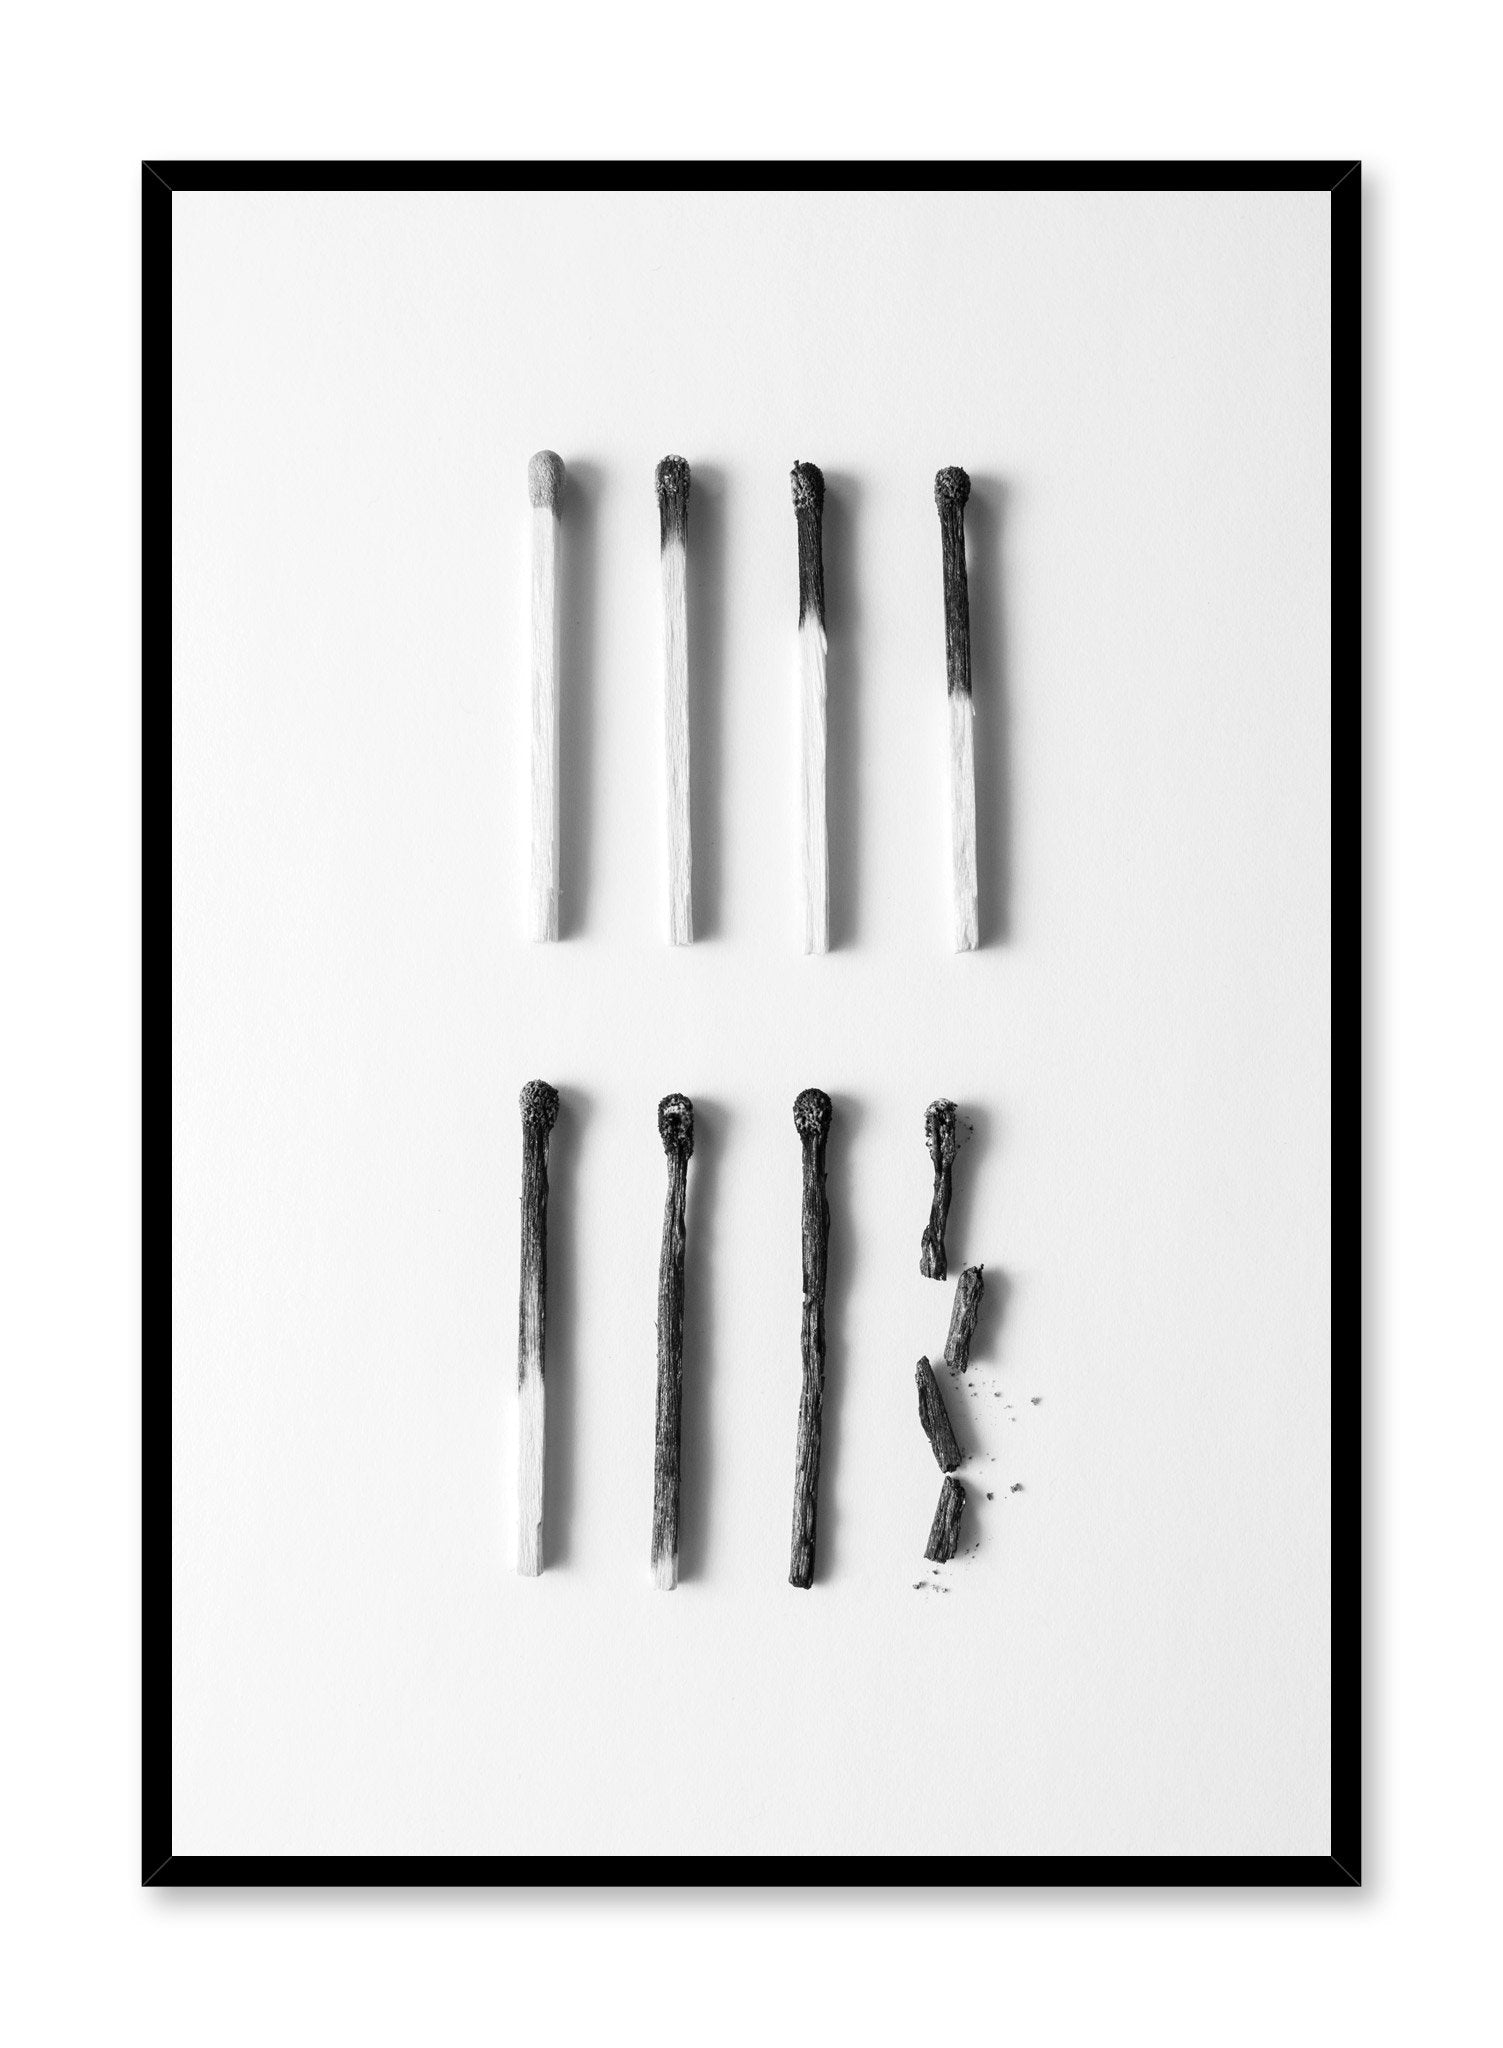 Modern minimalist poster by Opposite Wall with black and white photography of burned matches